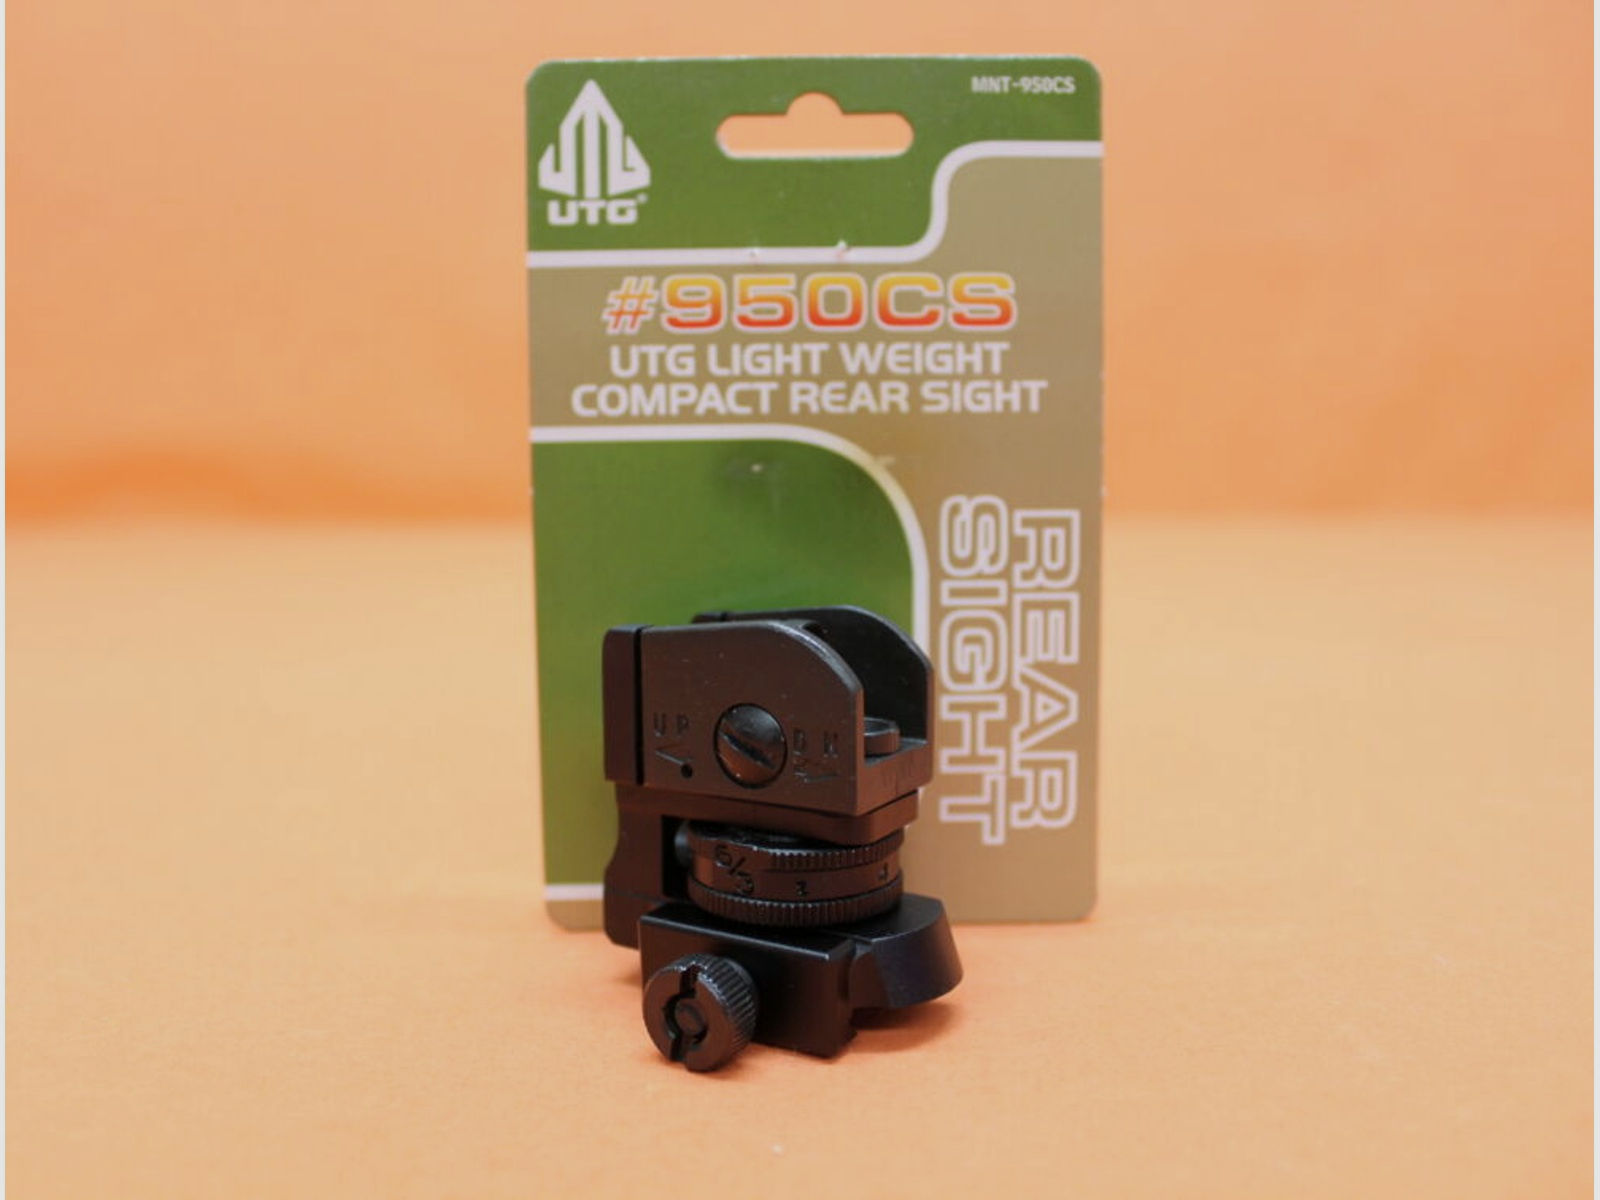 UTG - Leapers	 UTG Detachable Rear Sight Compact (MNT-950CS) Light Weight AR-15 A2 Dioptervisier f. Picatinnyprofil